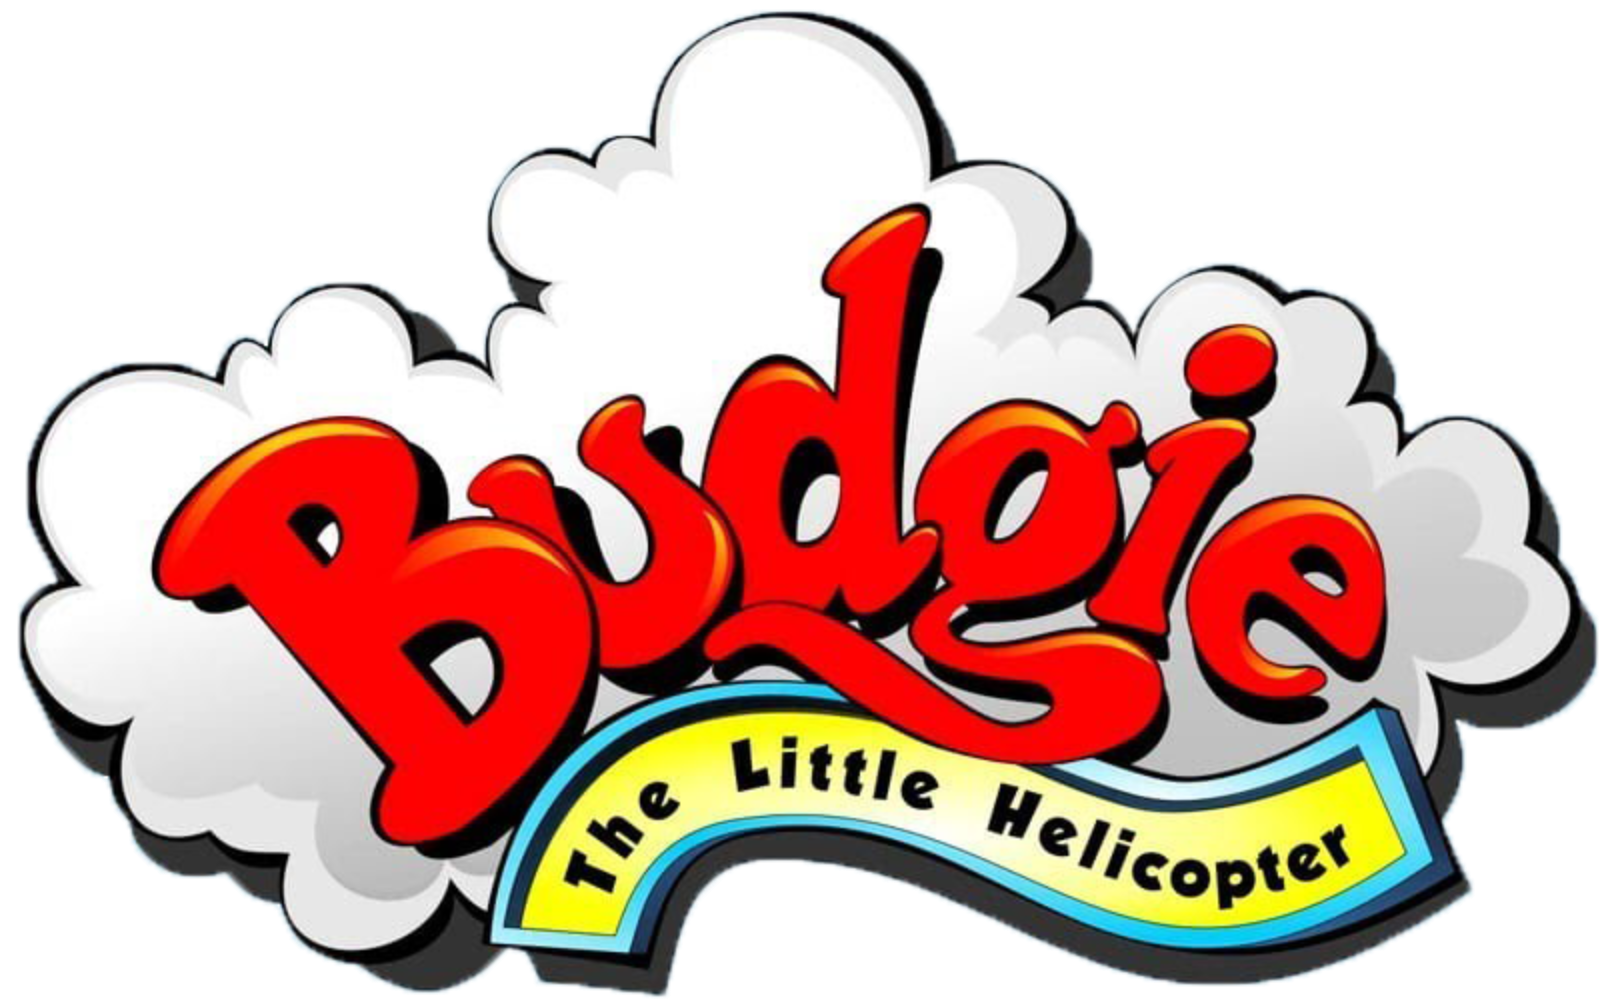 Budgie the Little Helicopter Complete (2 DVDs Box Set)